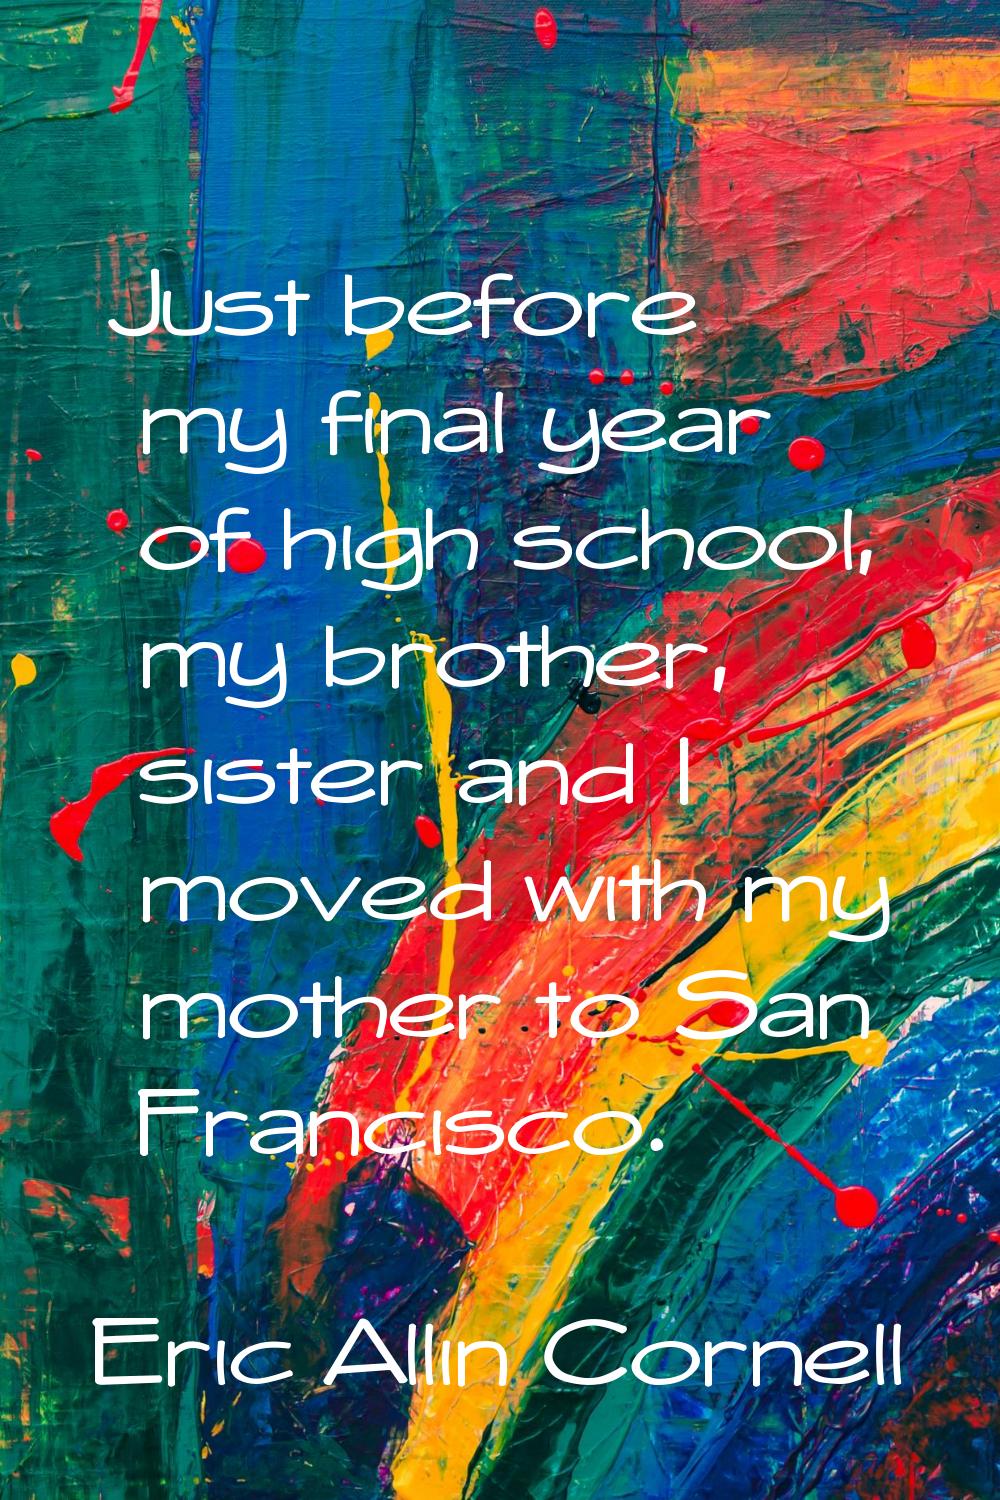 Just before my final year of high school, my brother, sister and I moved with my mother to San Fran